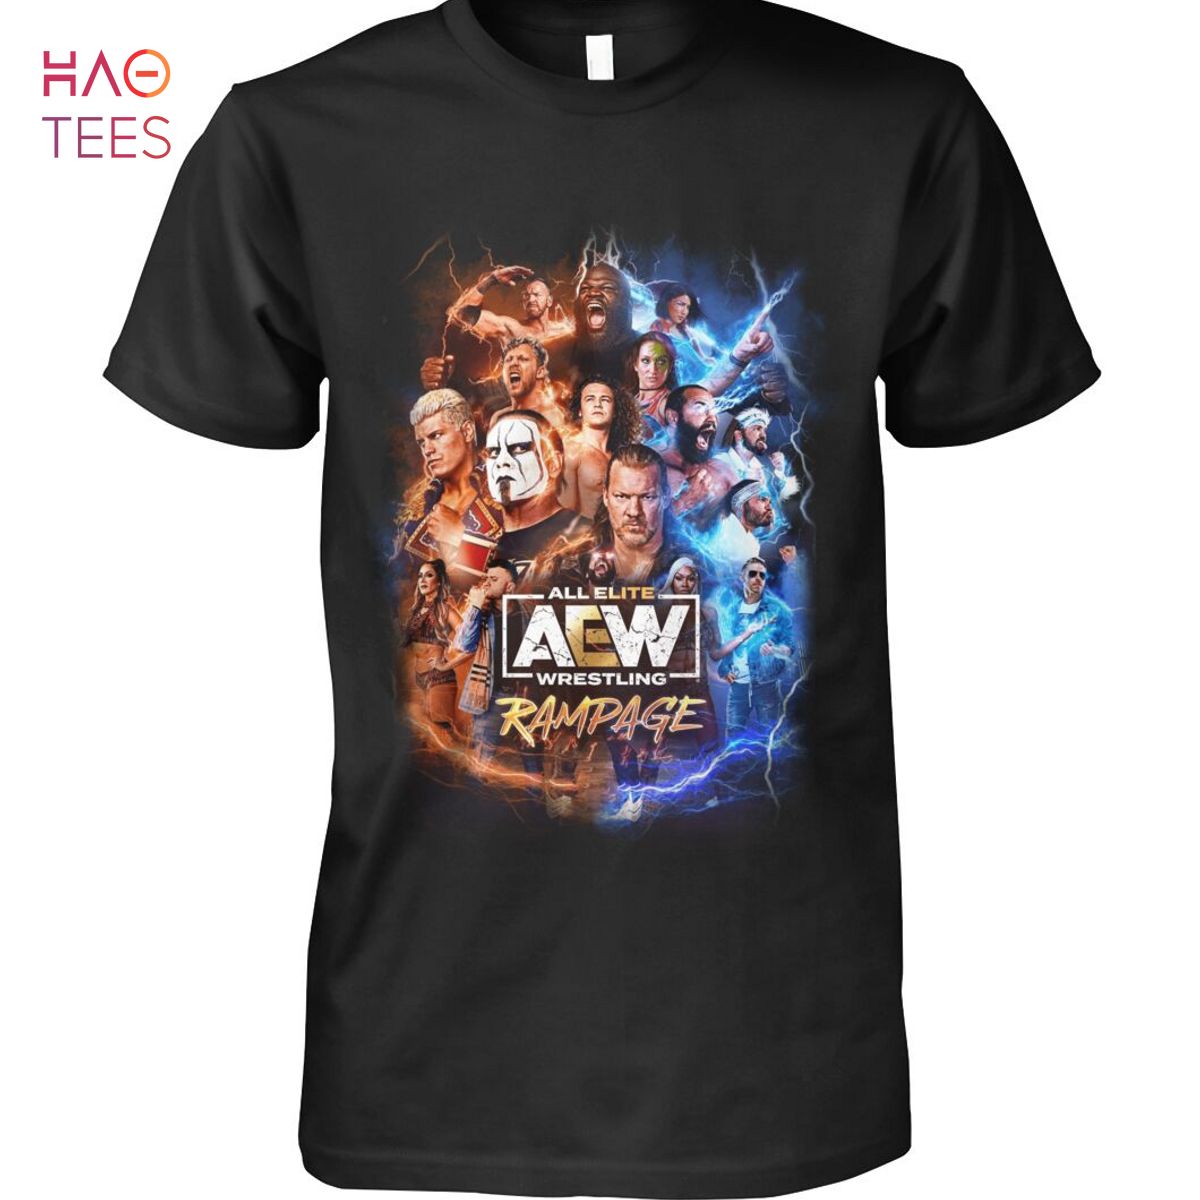 AEW Rampage Shirt Limited Edition